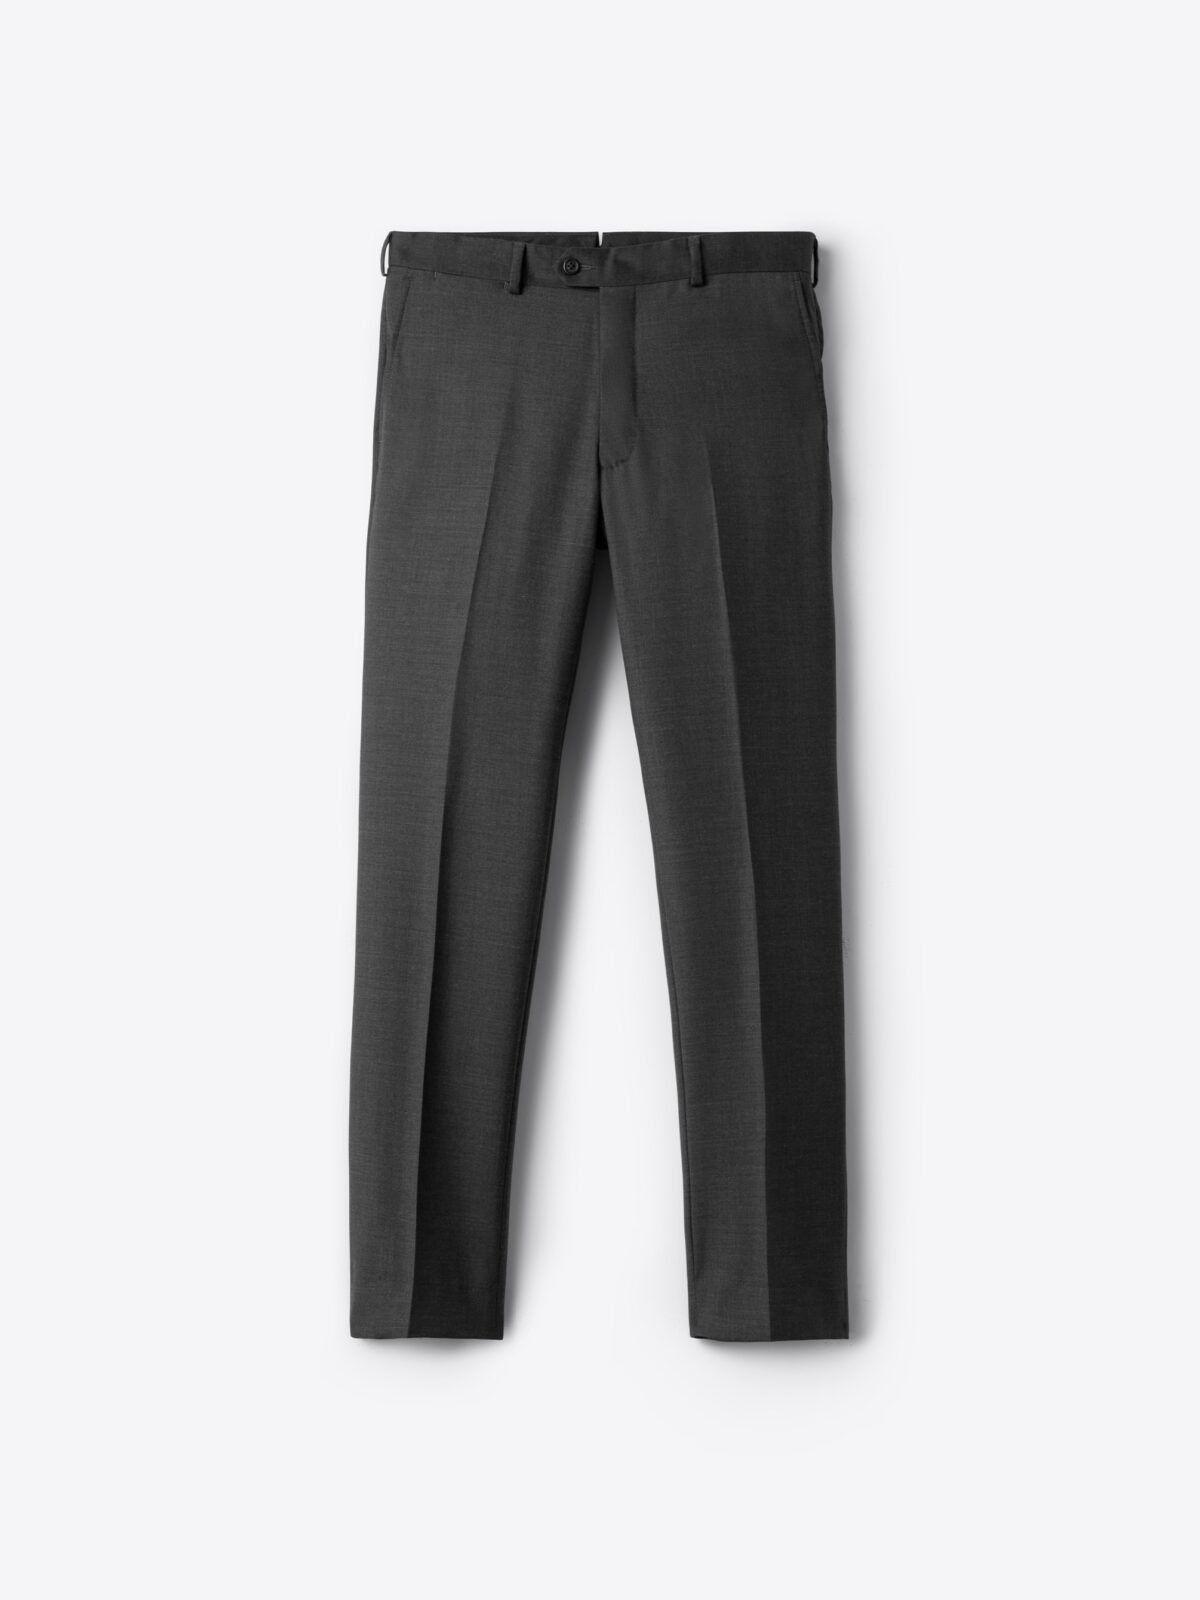 Argentina Charcoal Puppytooth Soft Handle Classic Fit Pants